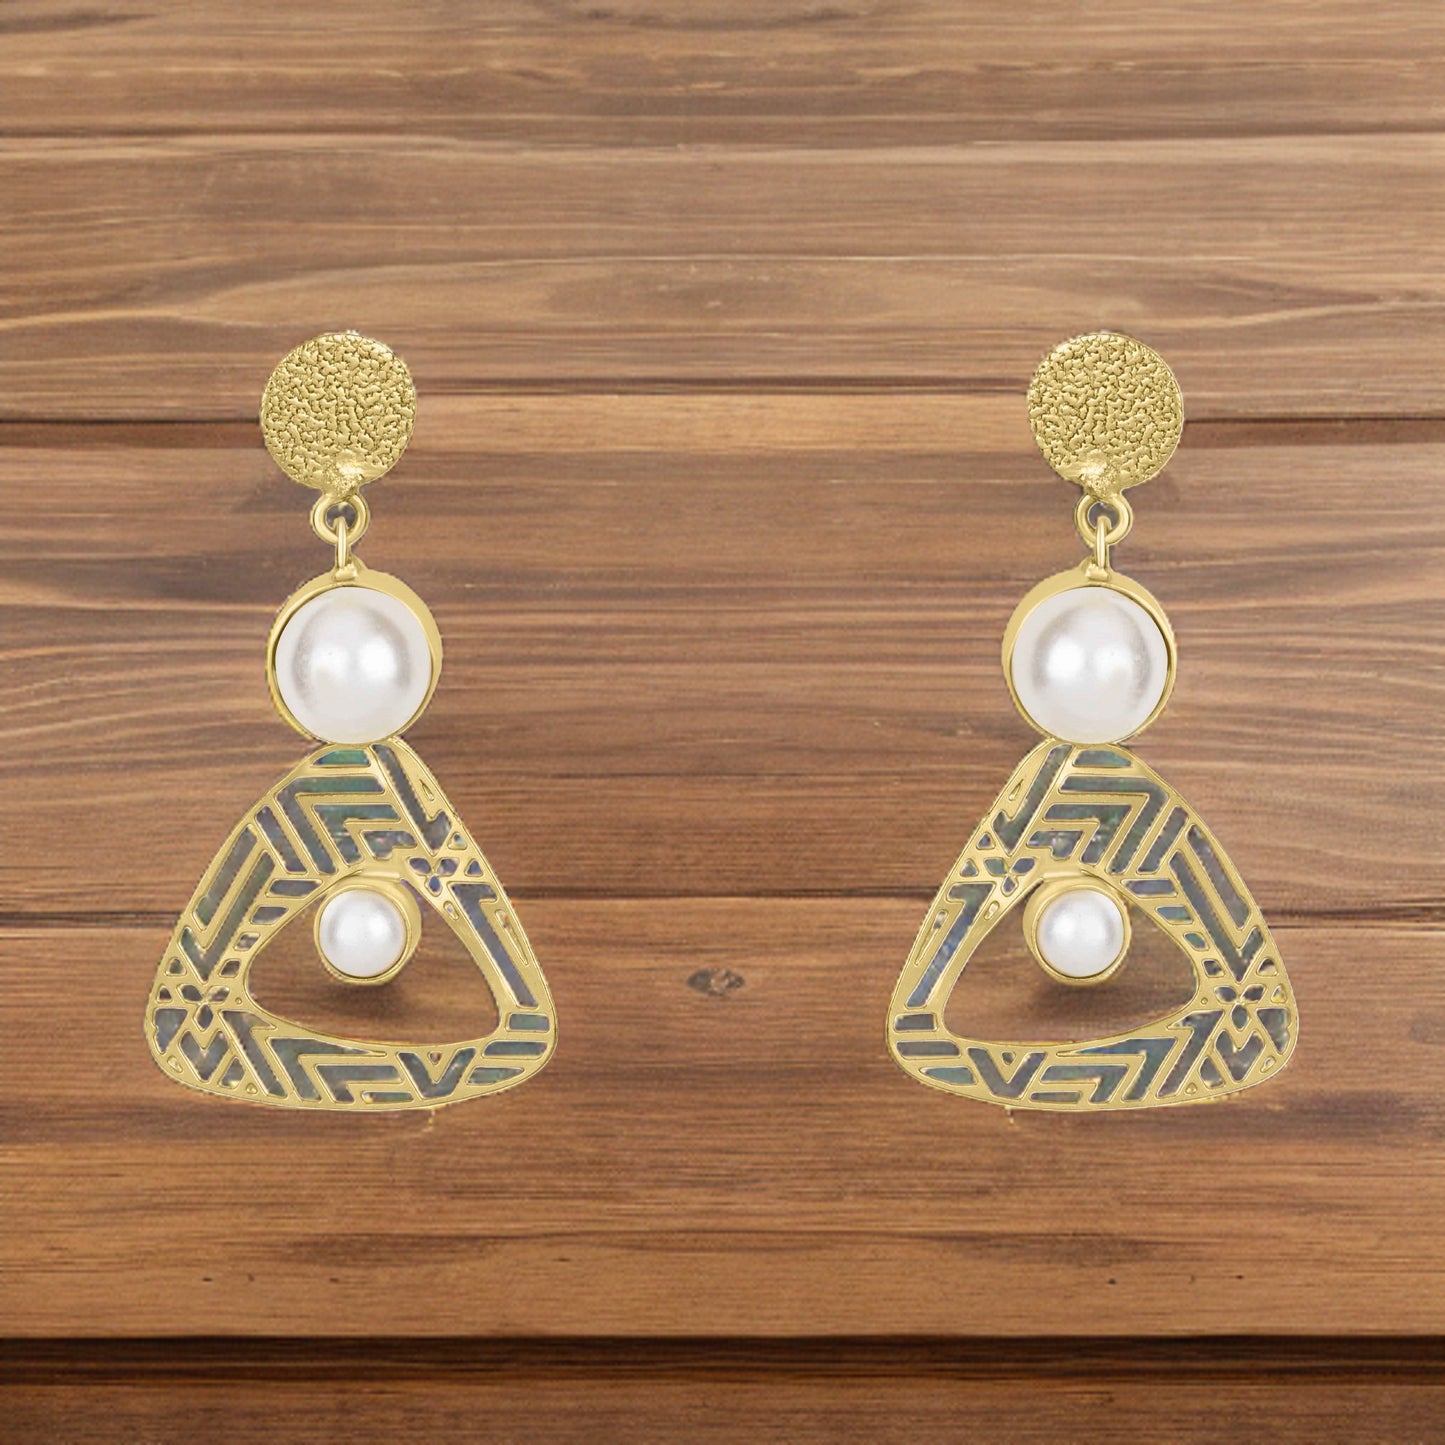 Bdiva 18K Gold Plated Light Weight Triangale Pearl Danglers.